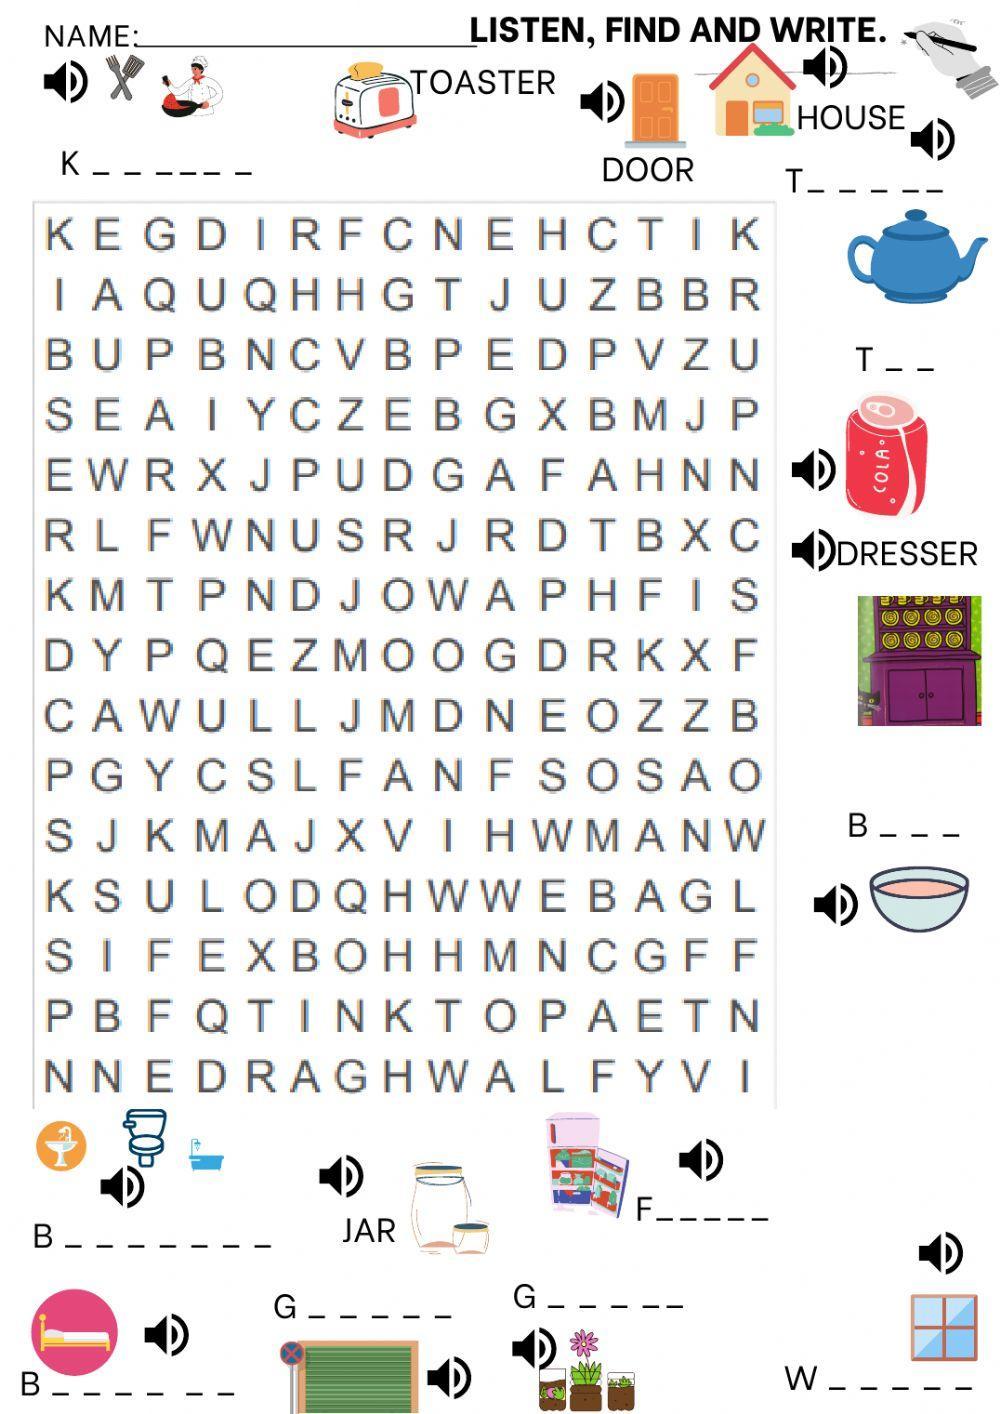 What-s in the witch-s house wordsearch